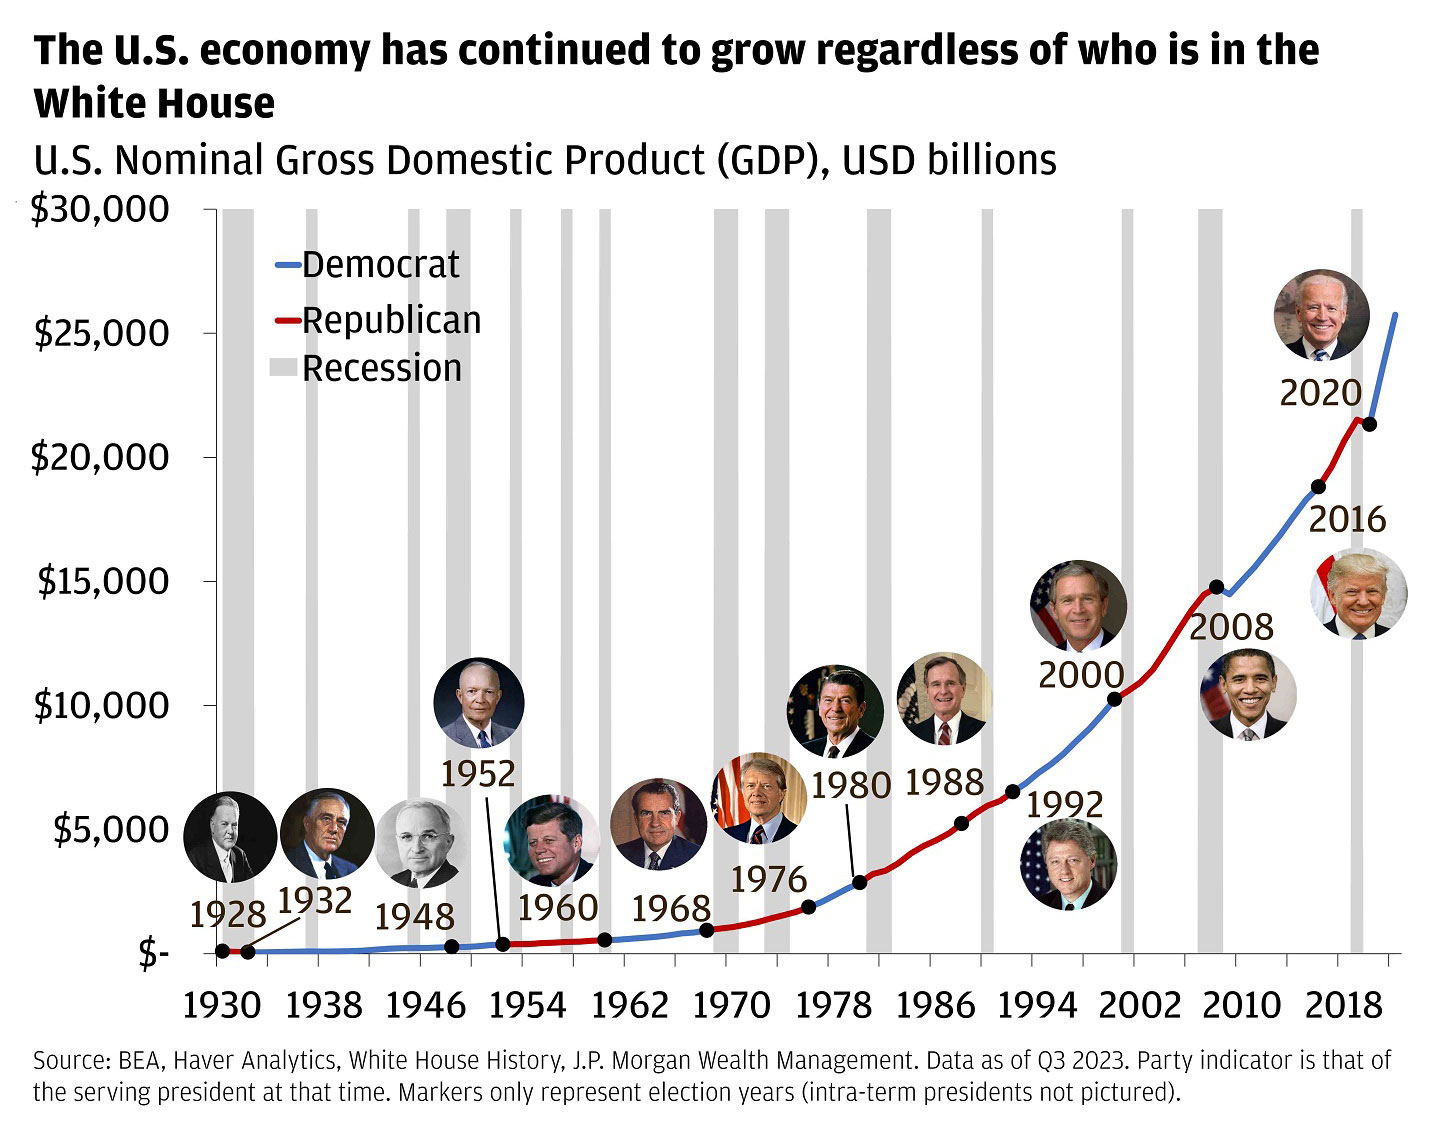 This chart shows nominal U.S. gross domestic product in billions of U.S. dollars from 1930 to 2018, but with data recorded until the third quarter of 2023.